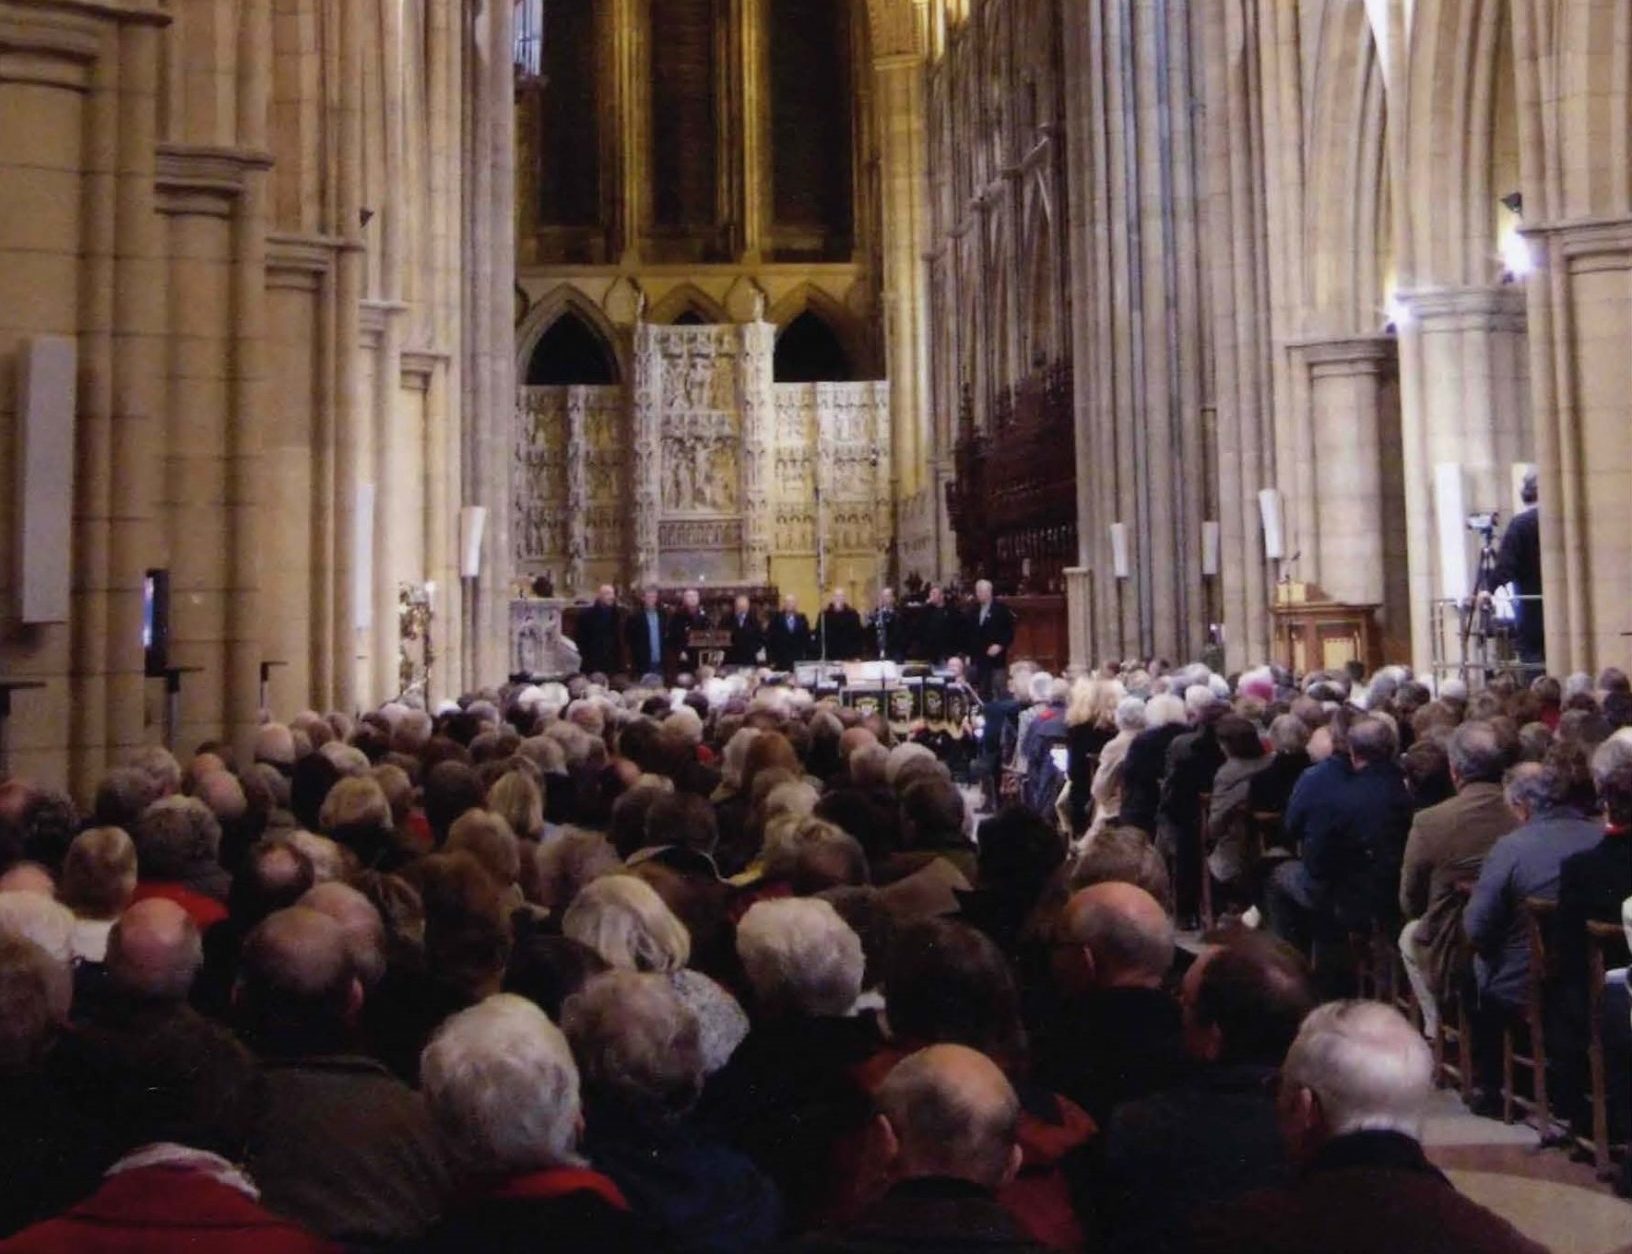 Fisherman's Friends sing in Truro Cathedral, 2010